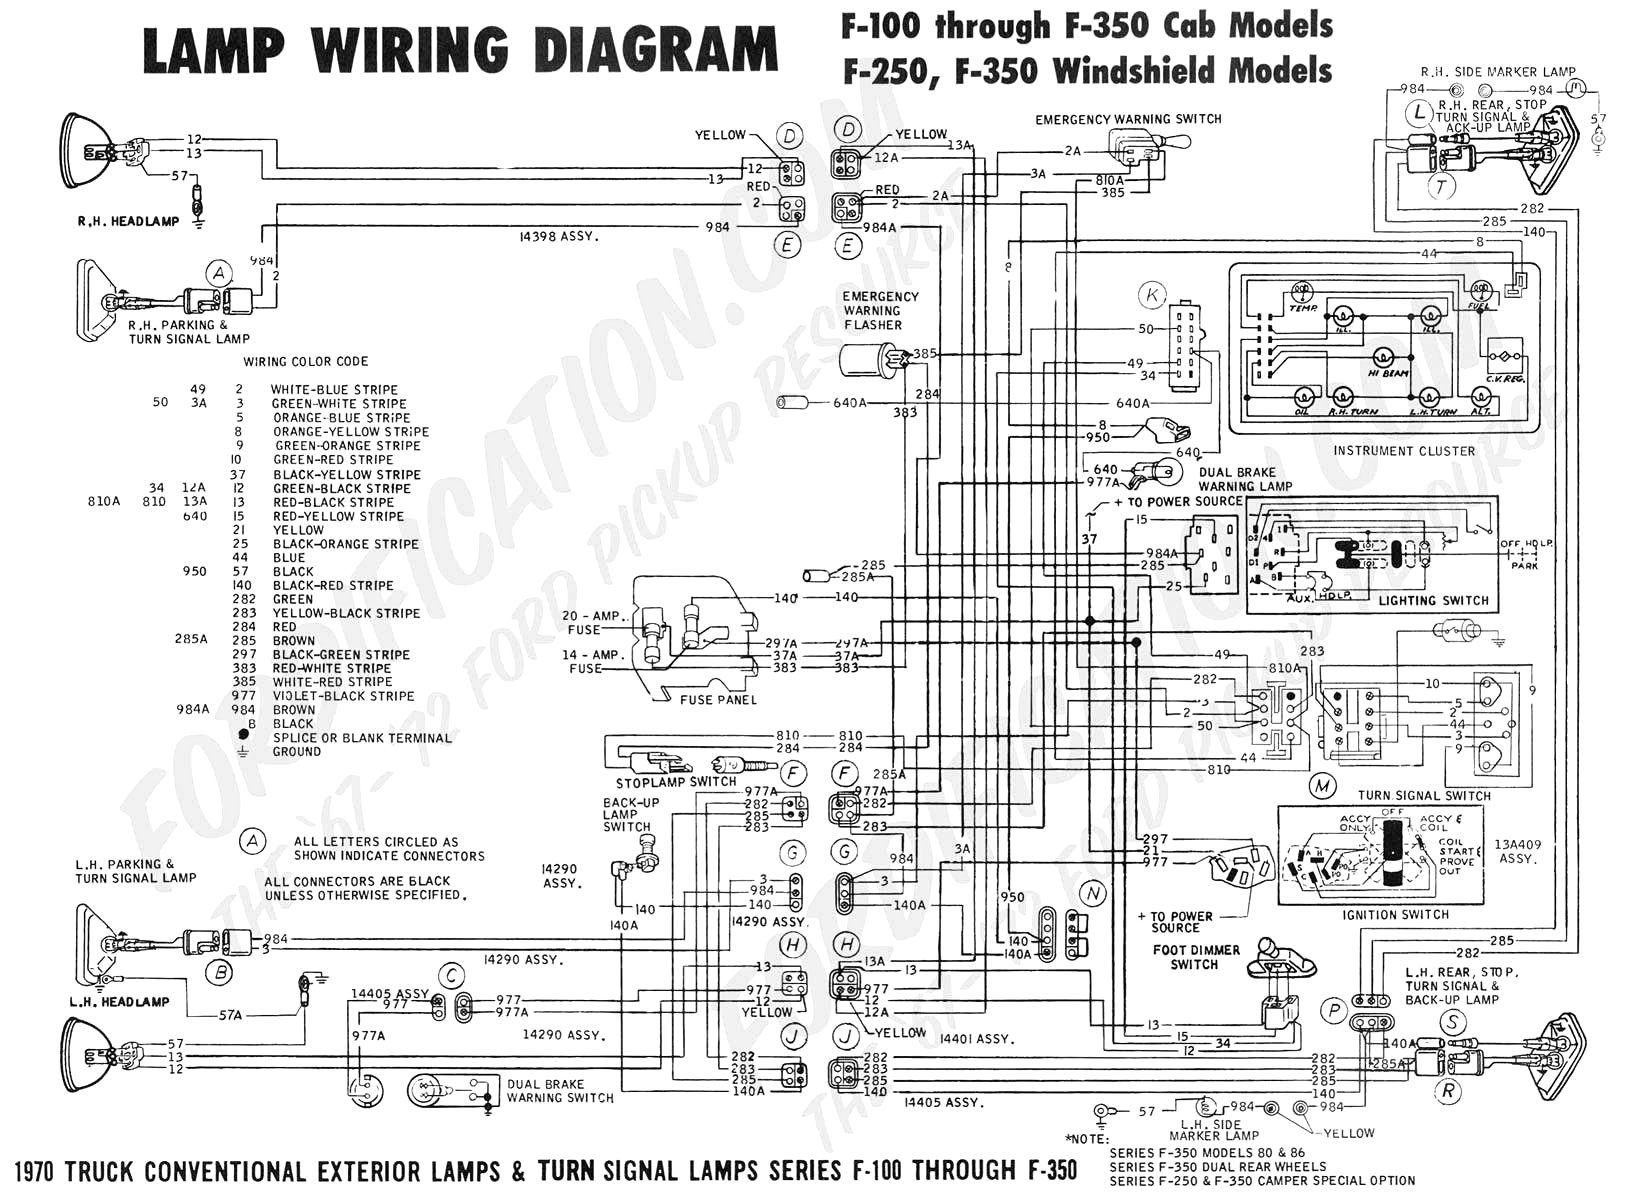 2004 ford explorer ignition wiring diagram simple 2004 ford ranger engine diagram mustang wiring diagram fordr stereo of 2004 ford explorer ignition wiring diagram jpg